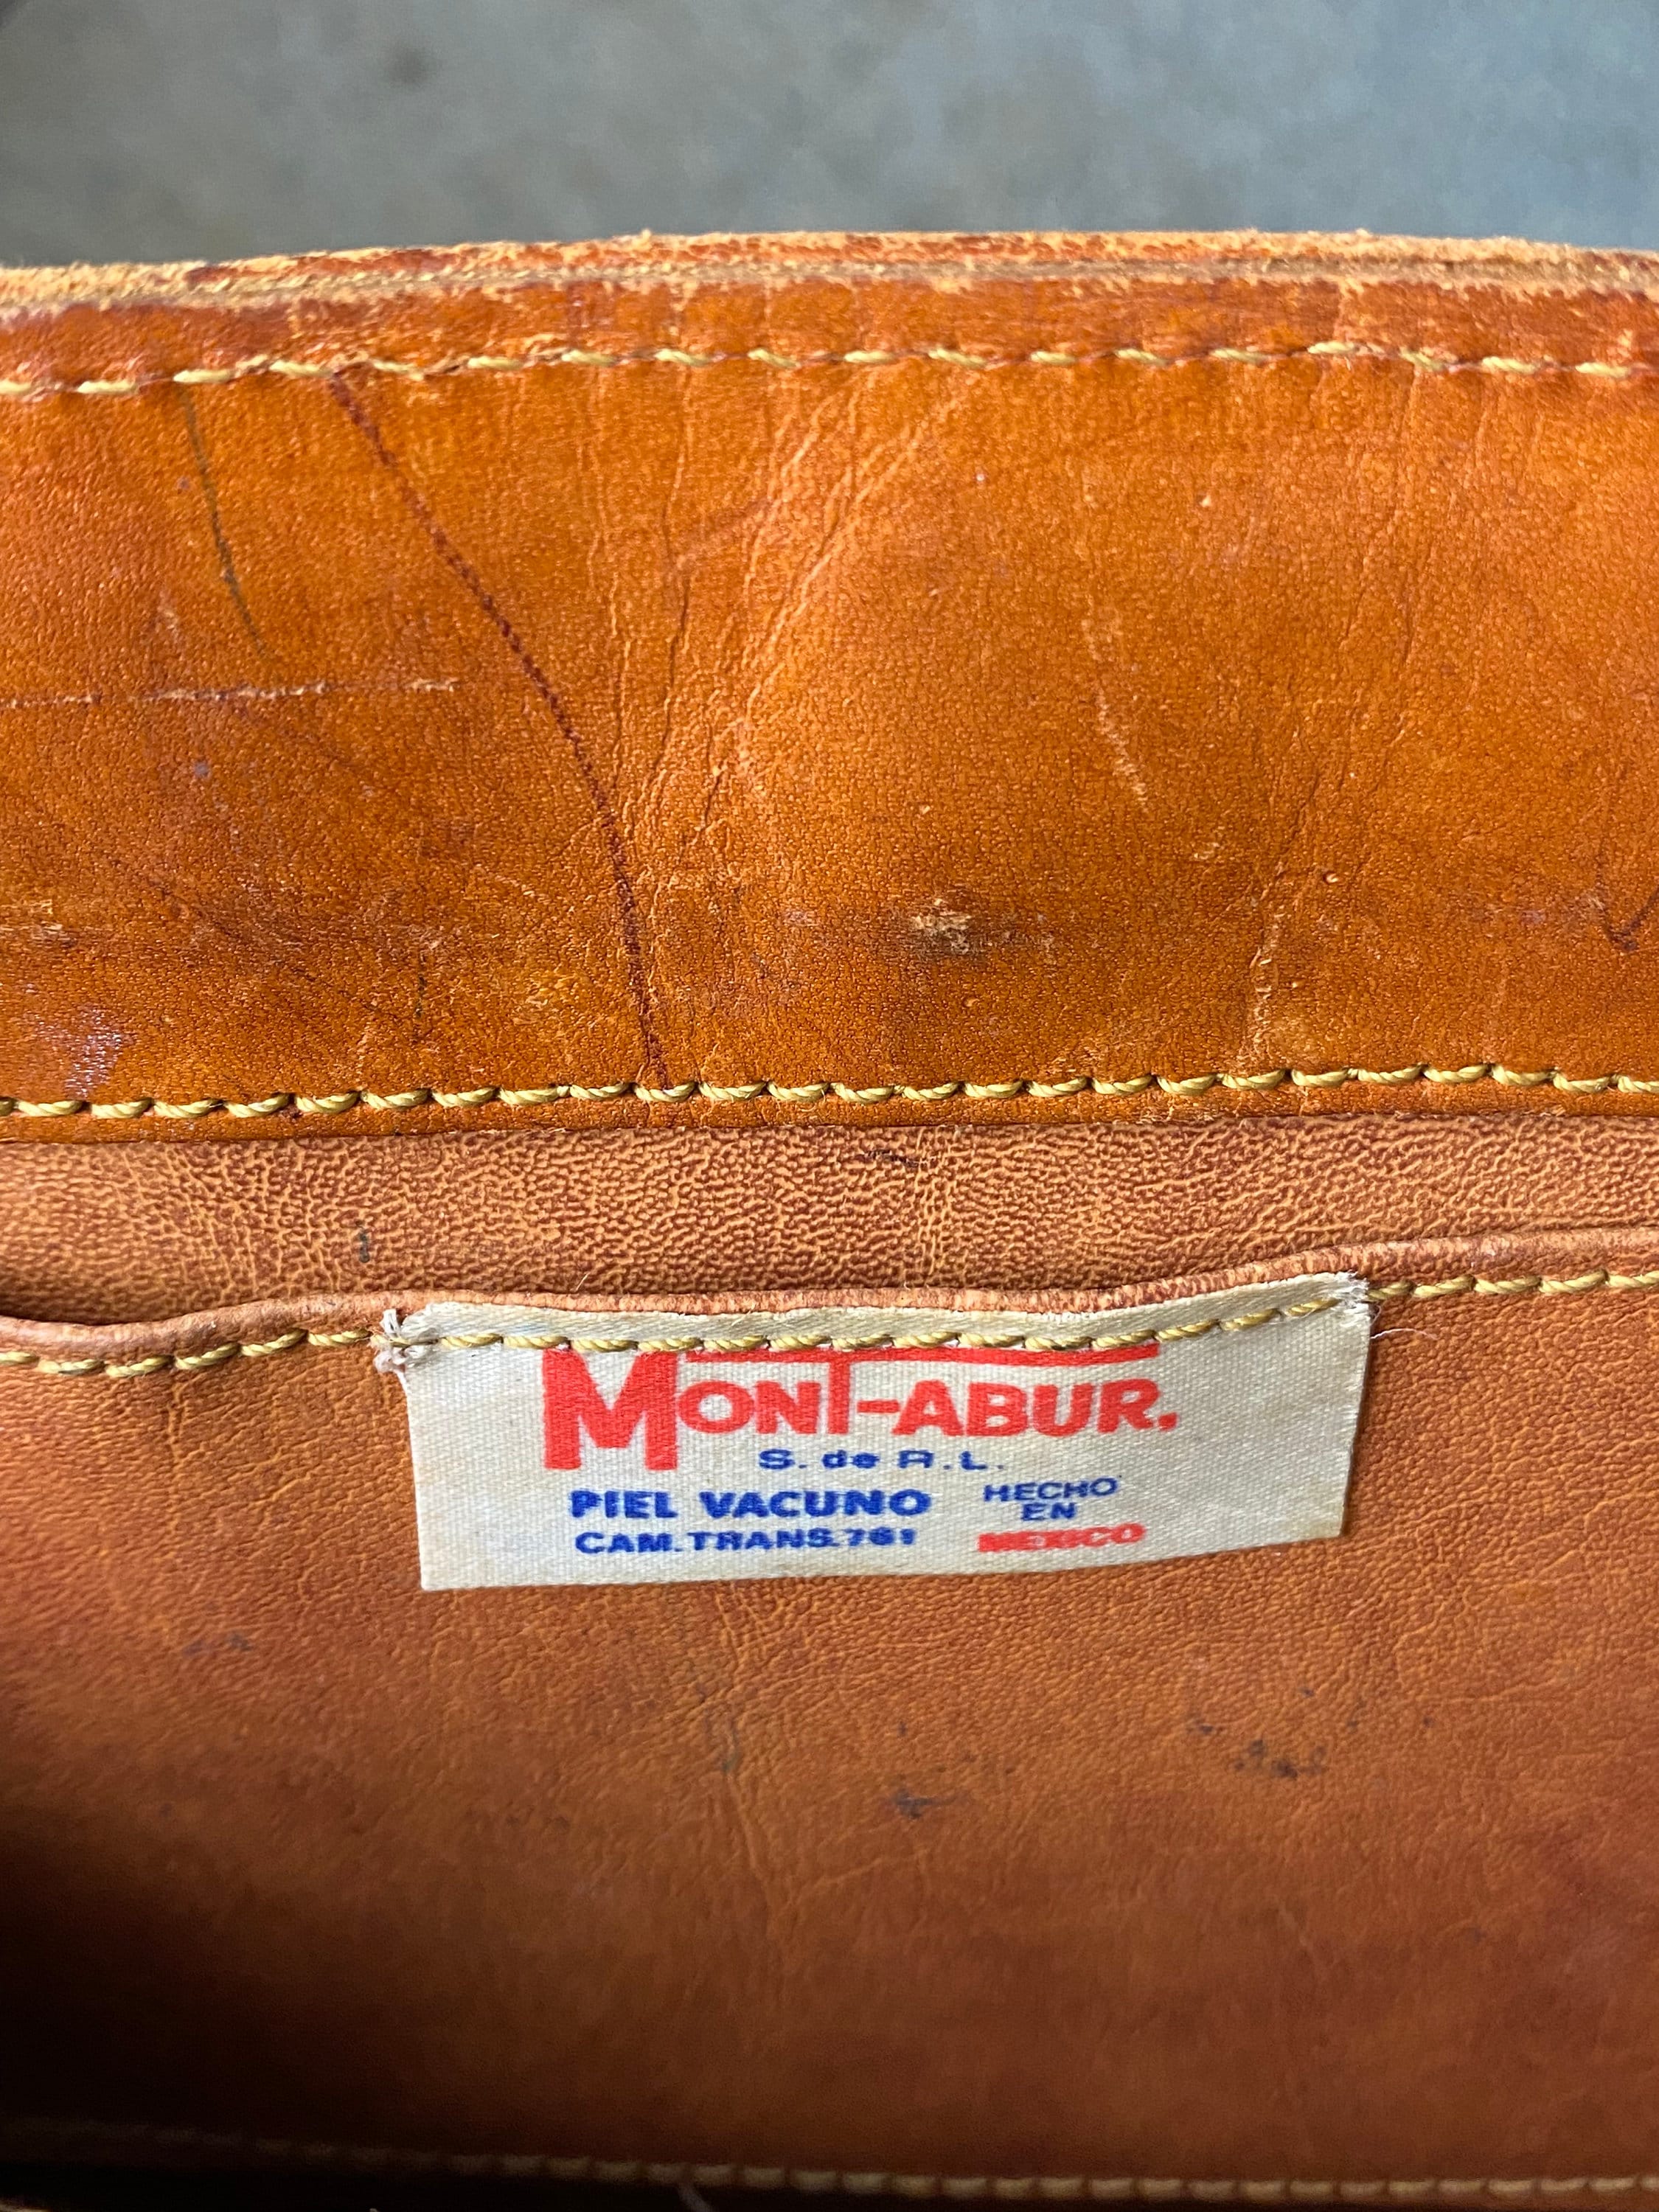 Seeking advice on how to restore an old leather bag : r/Leathercraft